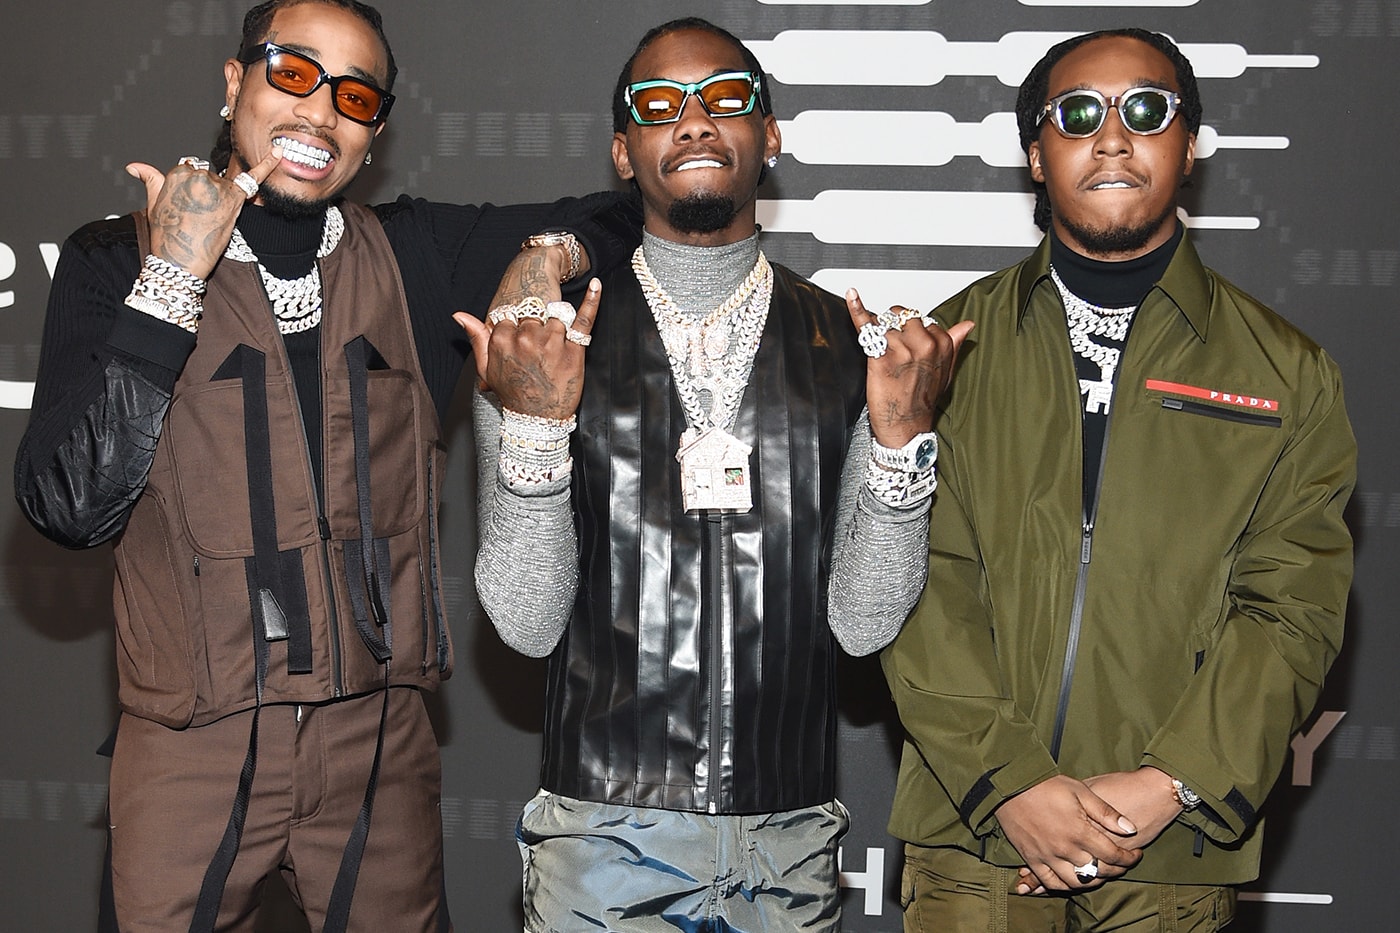 quavo Migos Culture III Album Finished 2021 the etcs kevin durant offset takeoff